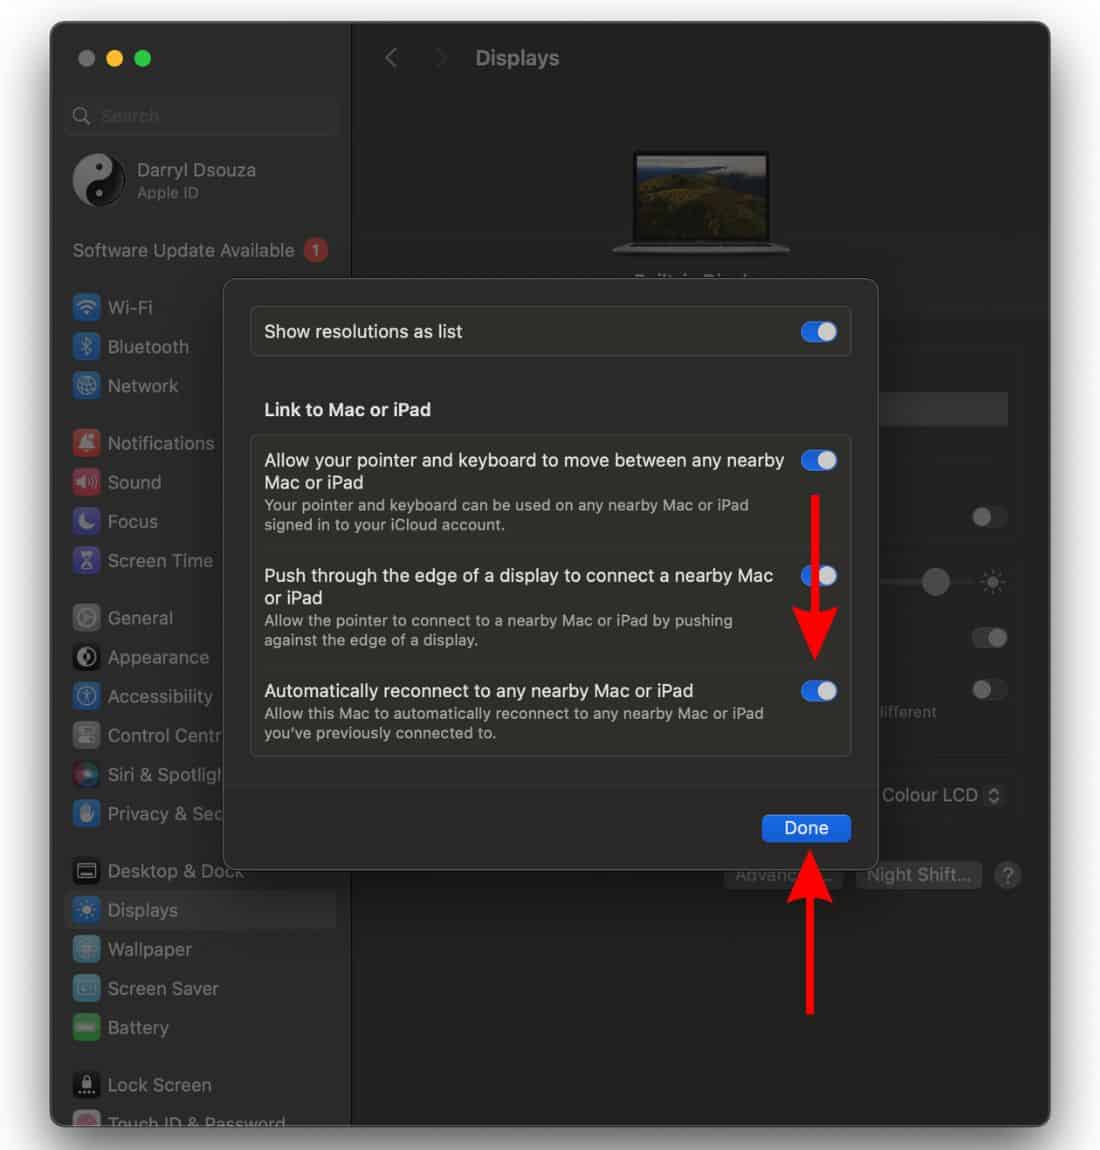 Enable Automatically Reconnect and click the Done button To Fix Screen Sharing Not Working in macOS Sonoma